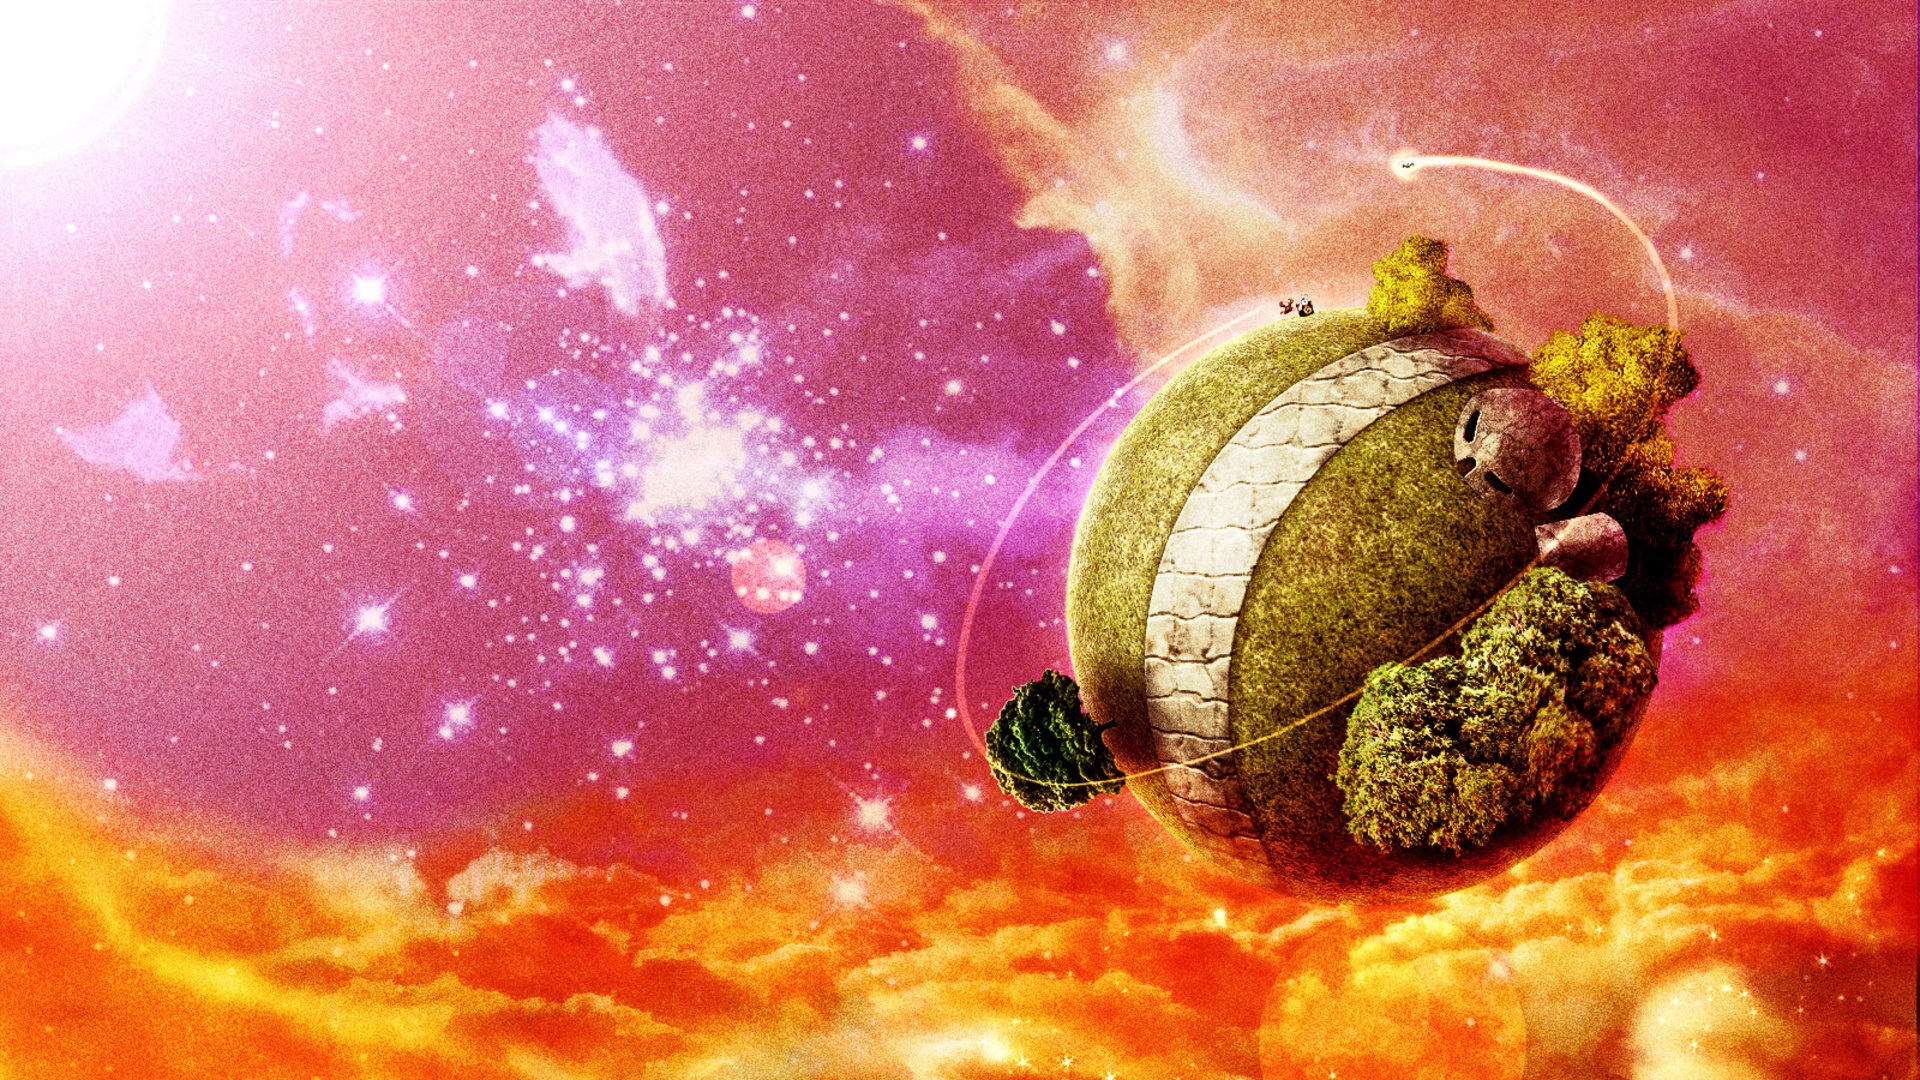 Dragon Ball Z Wallpapers Best Wallpapers